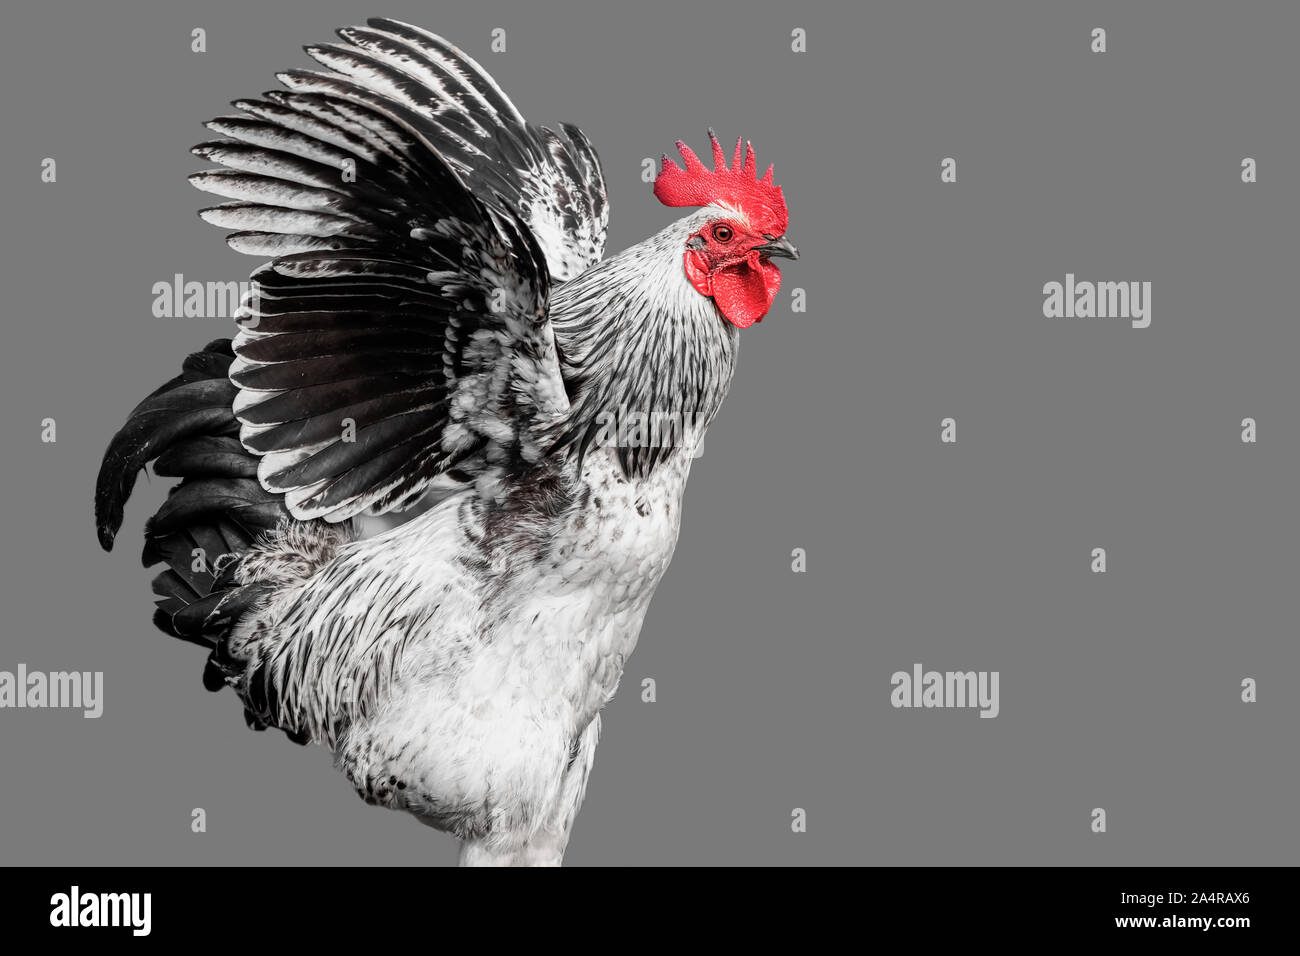 Red head Rooster pose with red as the only colour in a black white image  Stock Photo